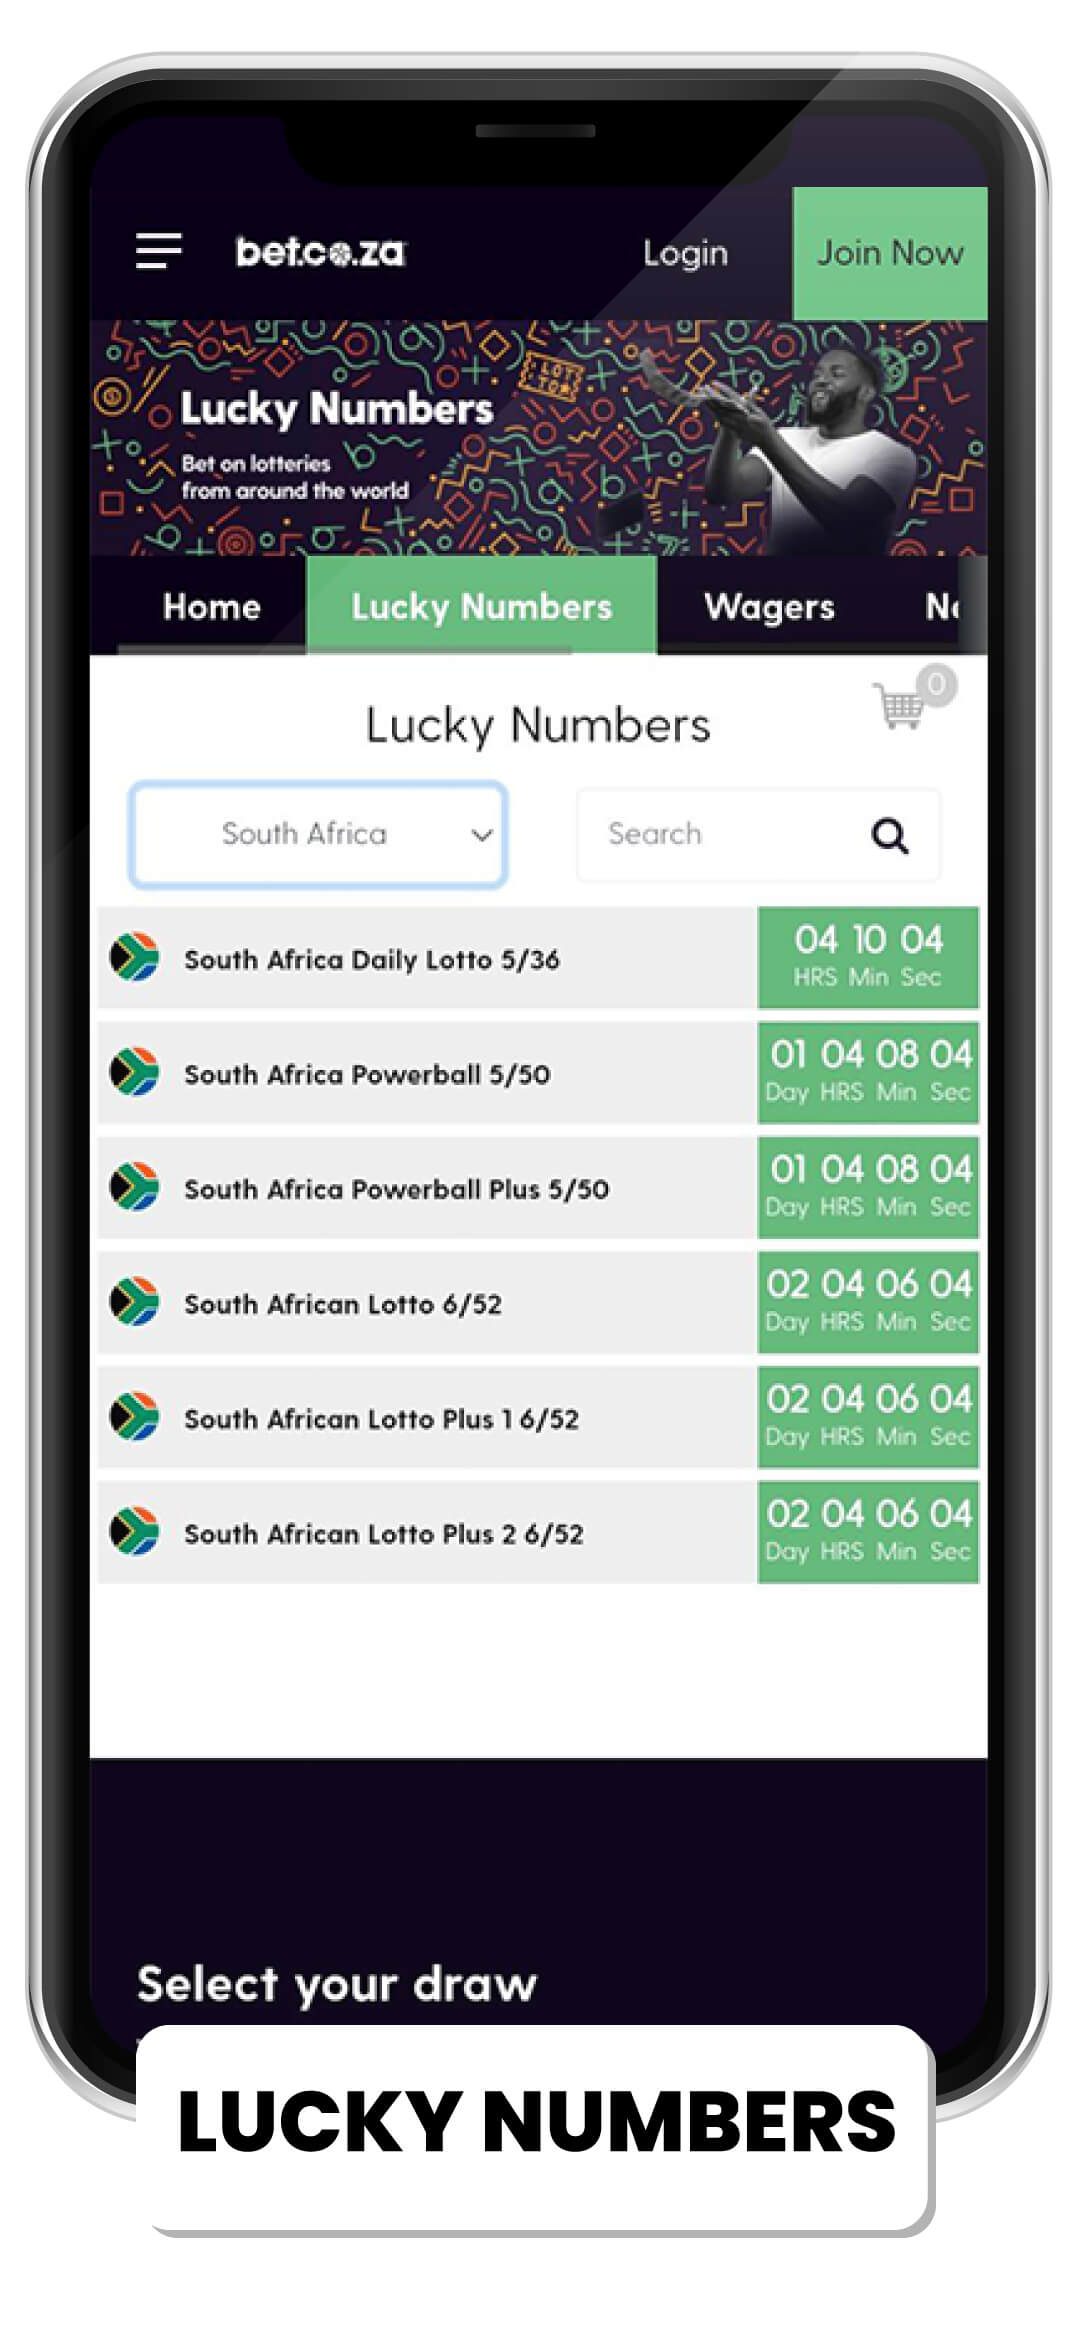 bet.co.za lotto (Lucky Numbers)